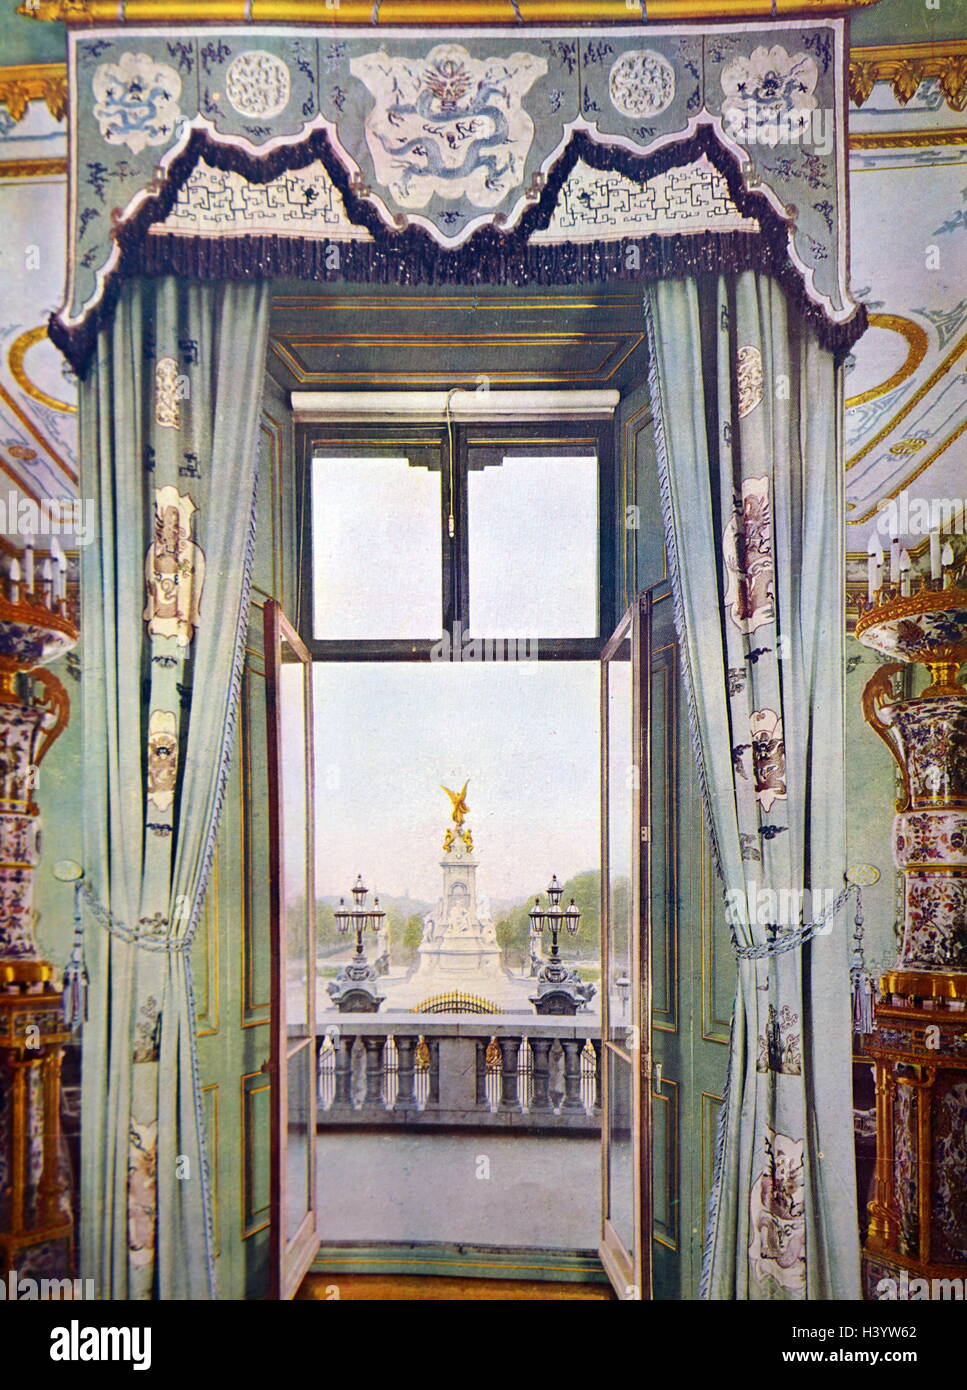 The Royal Balcony at Buckingham Palace. This would be where their majesties stand during loyal demonstrations by crowds outside the gates. Dated 20th Century Stock Photo